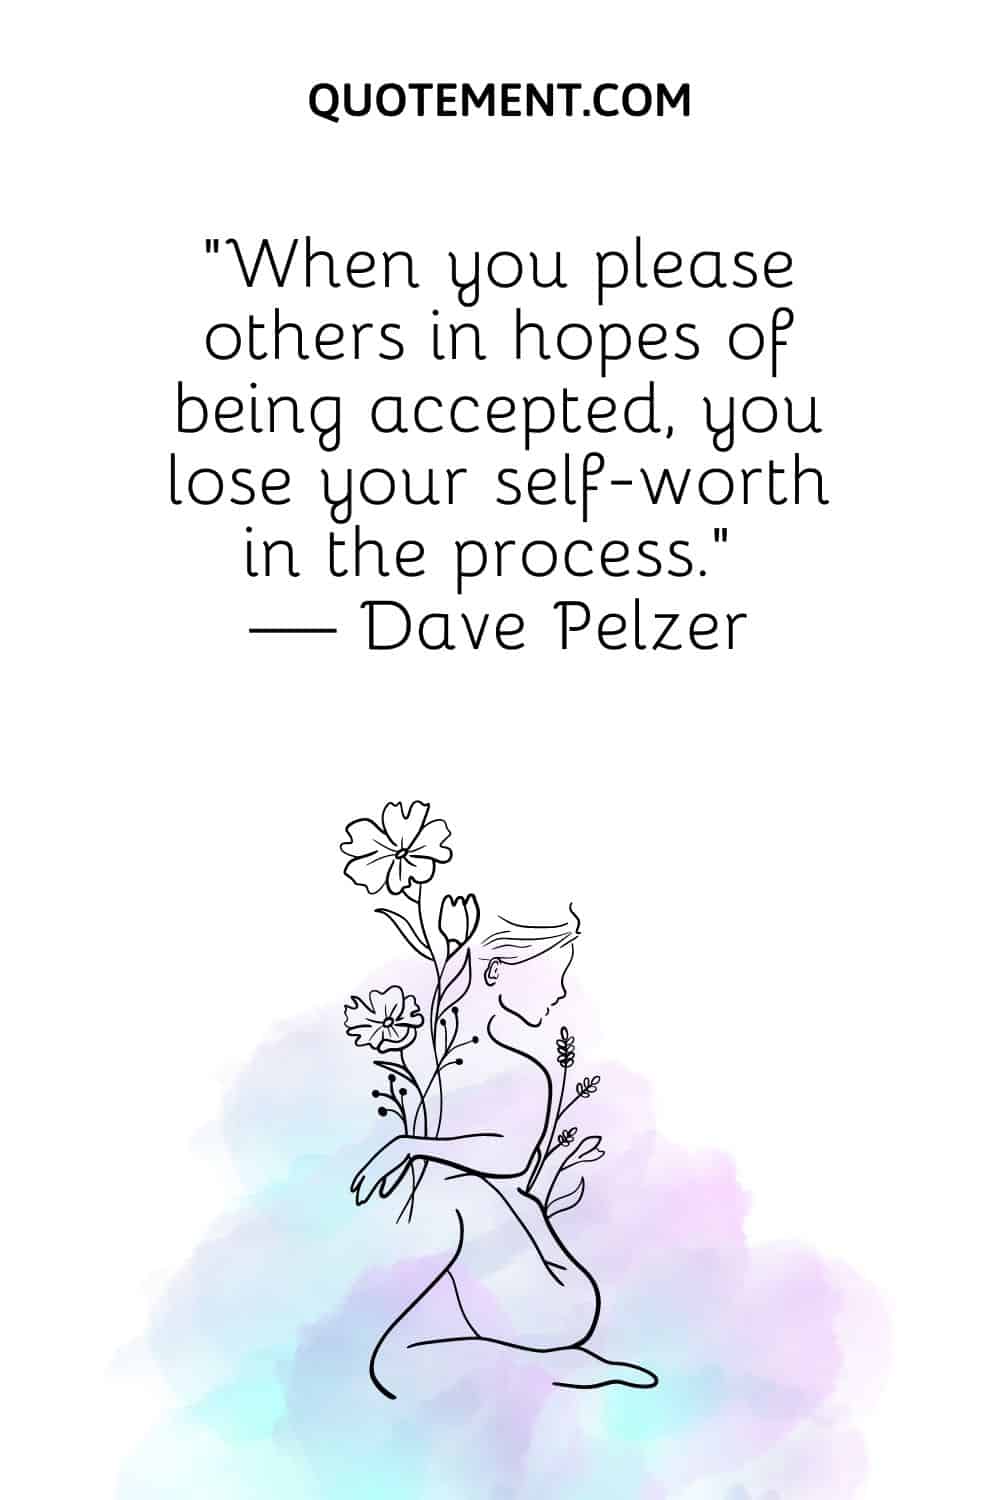 When you please others in hopes of being accepted, you lose your self-worth in the process